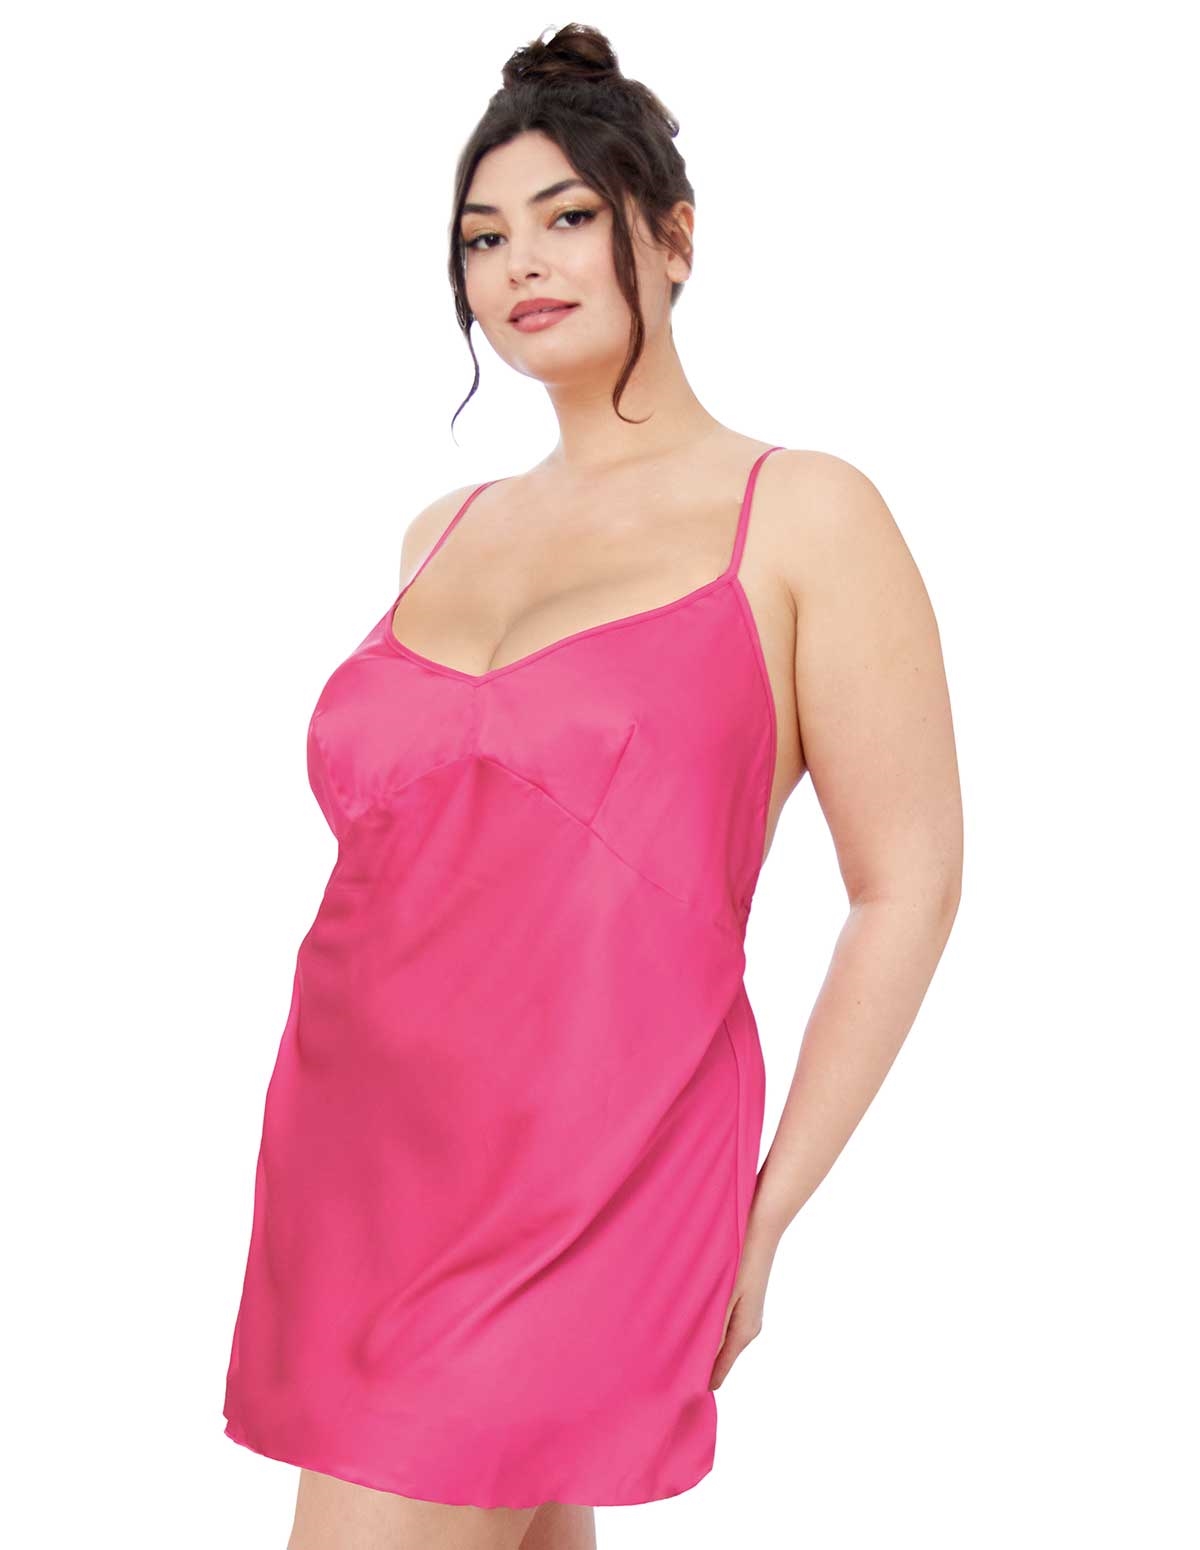 alternate image for Sweetie Satin Plus Size Chemise And G-String Set